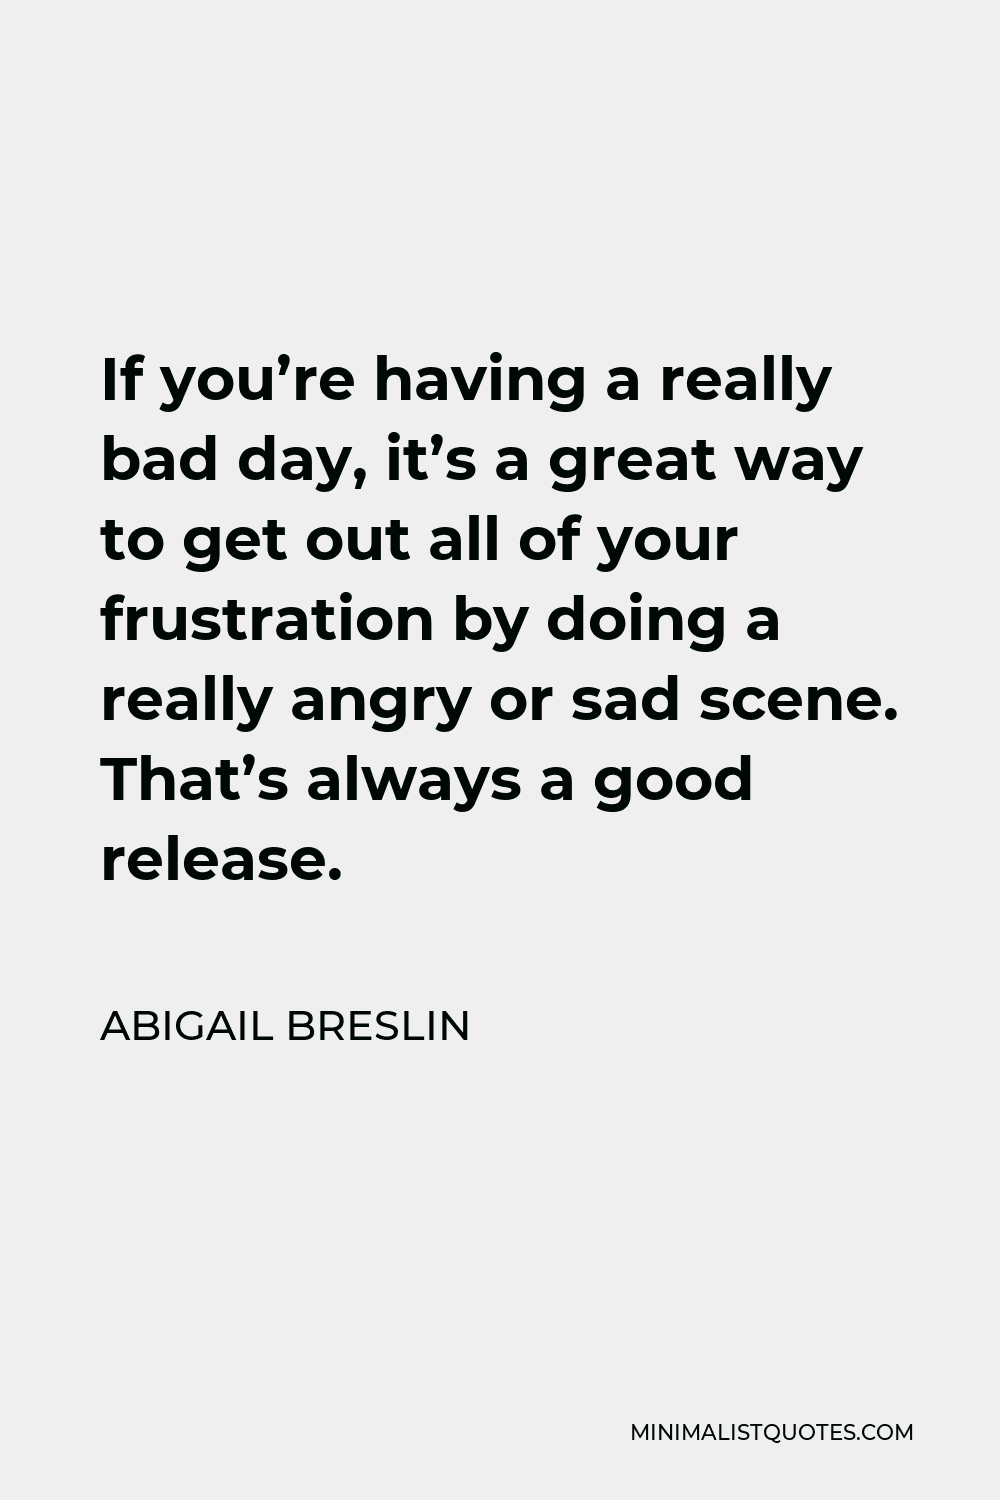 Abigail Breslin Quote - If you’re having a really bad day, it’s a great way to get out all of your frustration by doing a really angry or sad scene. That’s always a good release.